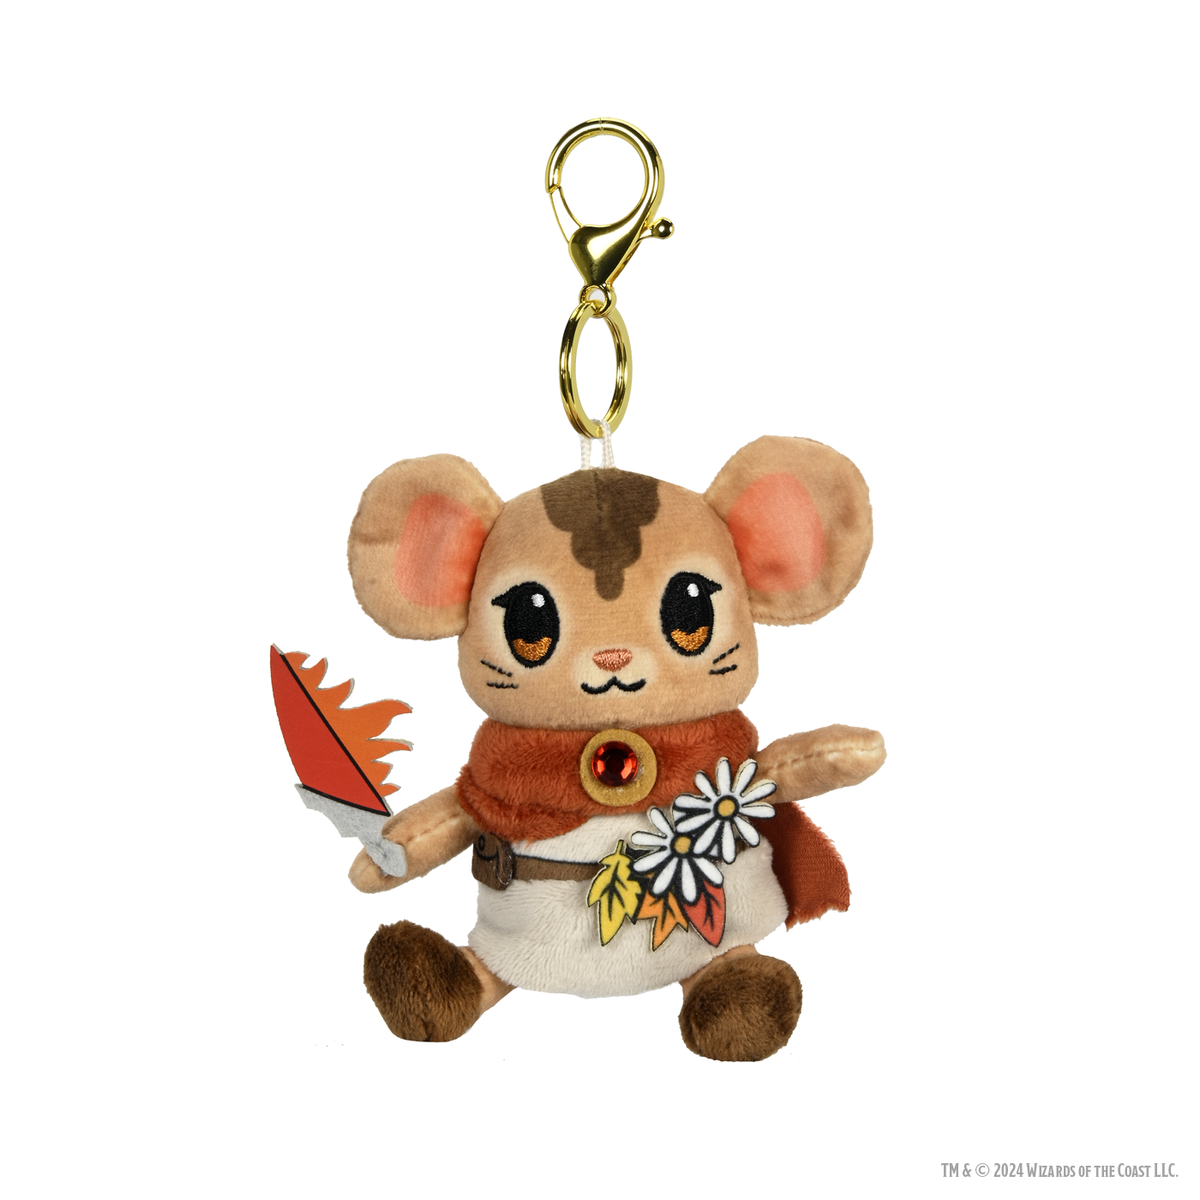 MTG Teams Up With WizKids For Line Of Plush Charms